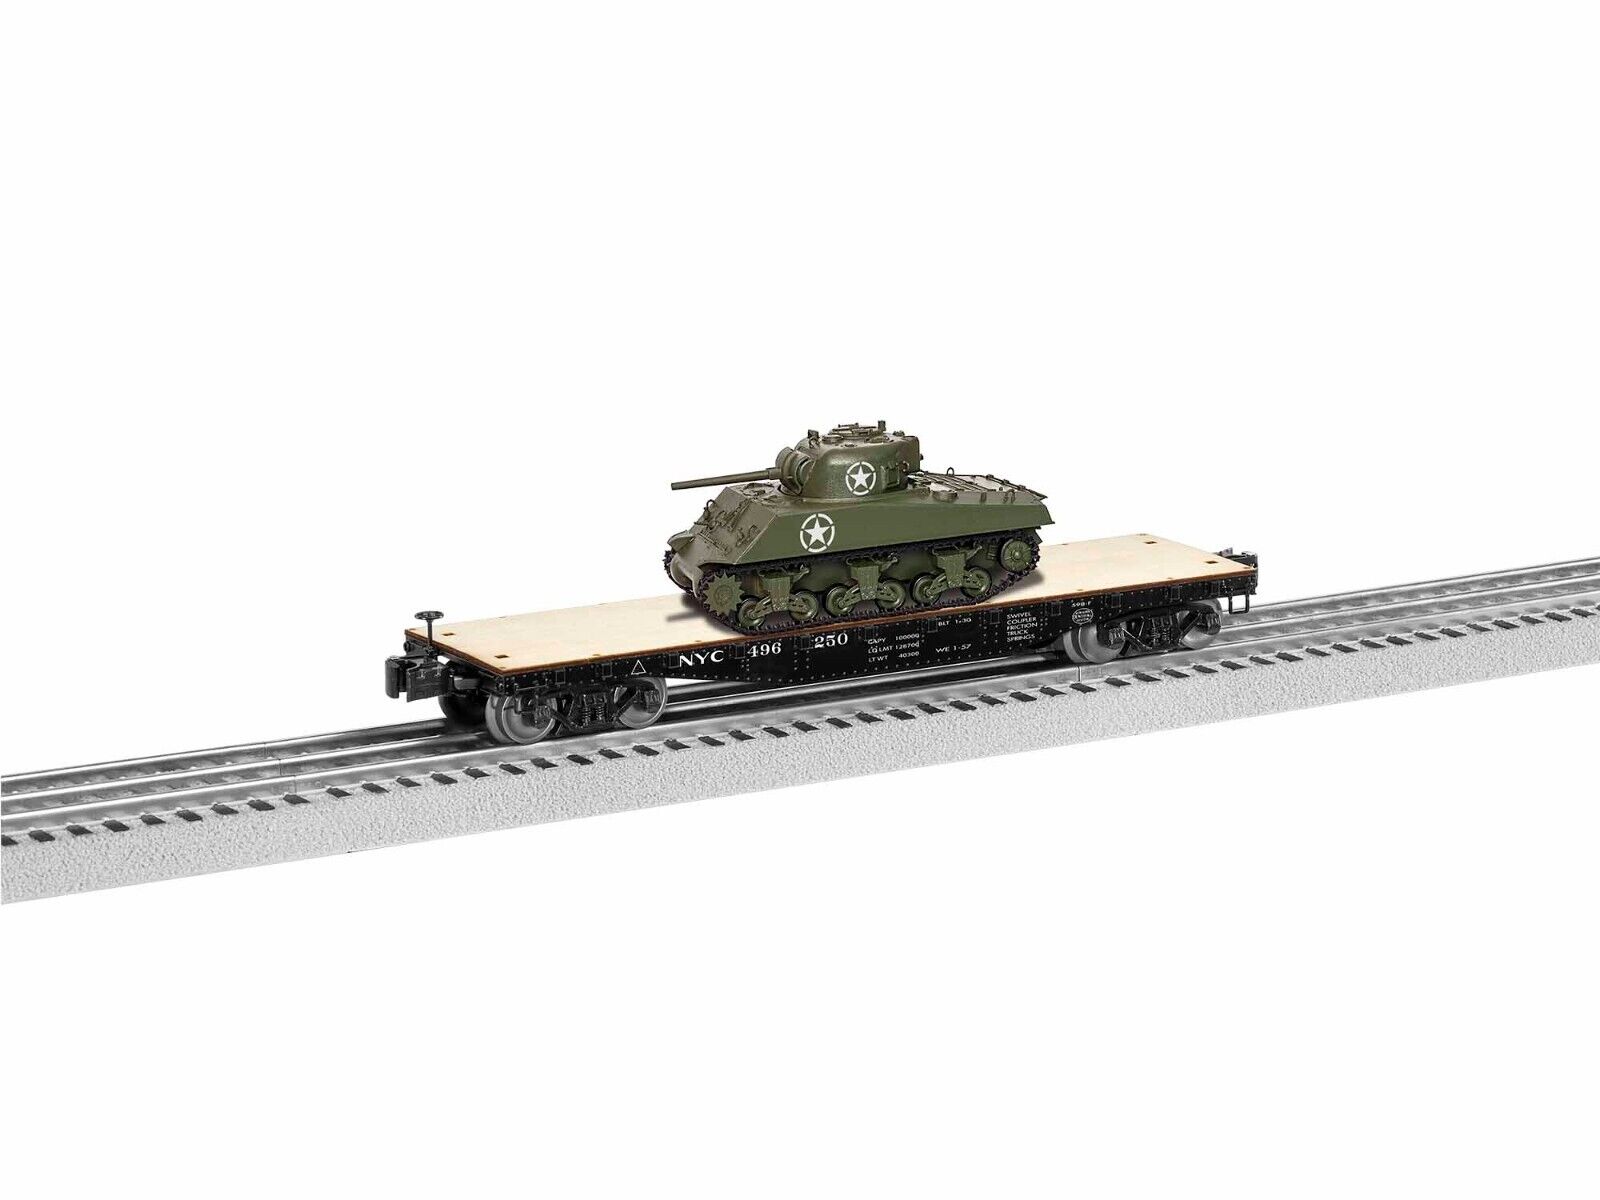 LIONEL 1926711 NEW YORK CENTRAL 40' FLATCAR WITH SHERMAN TANK # 496250